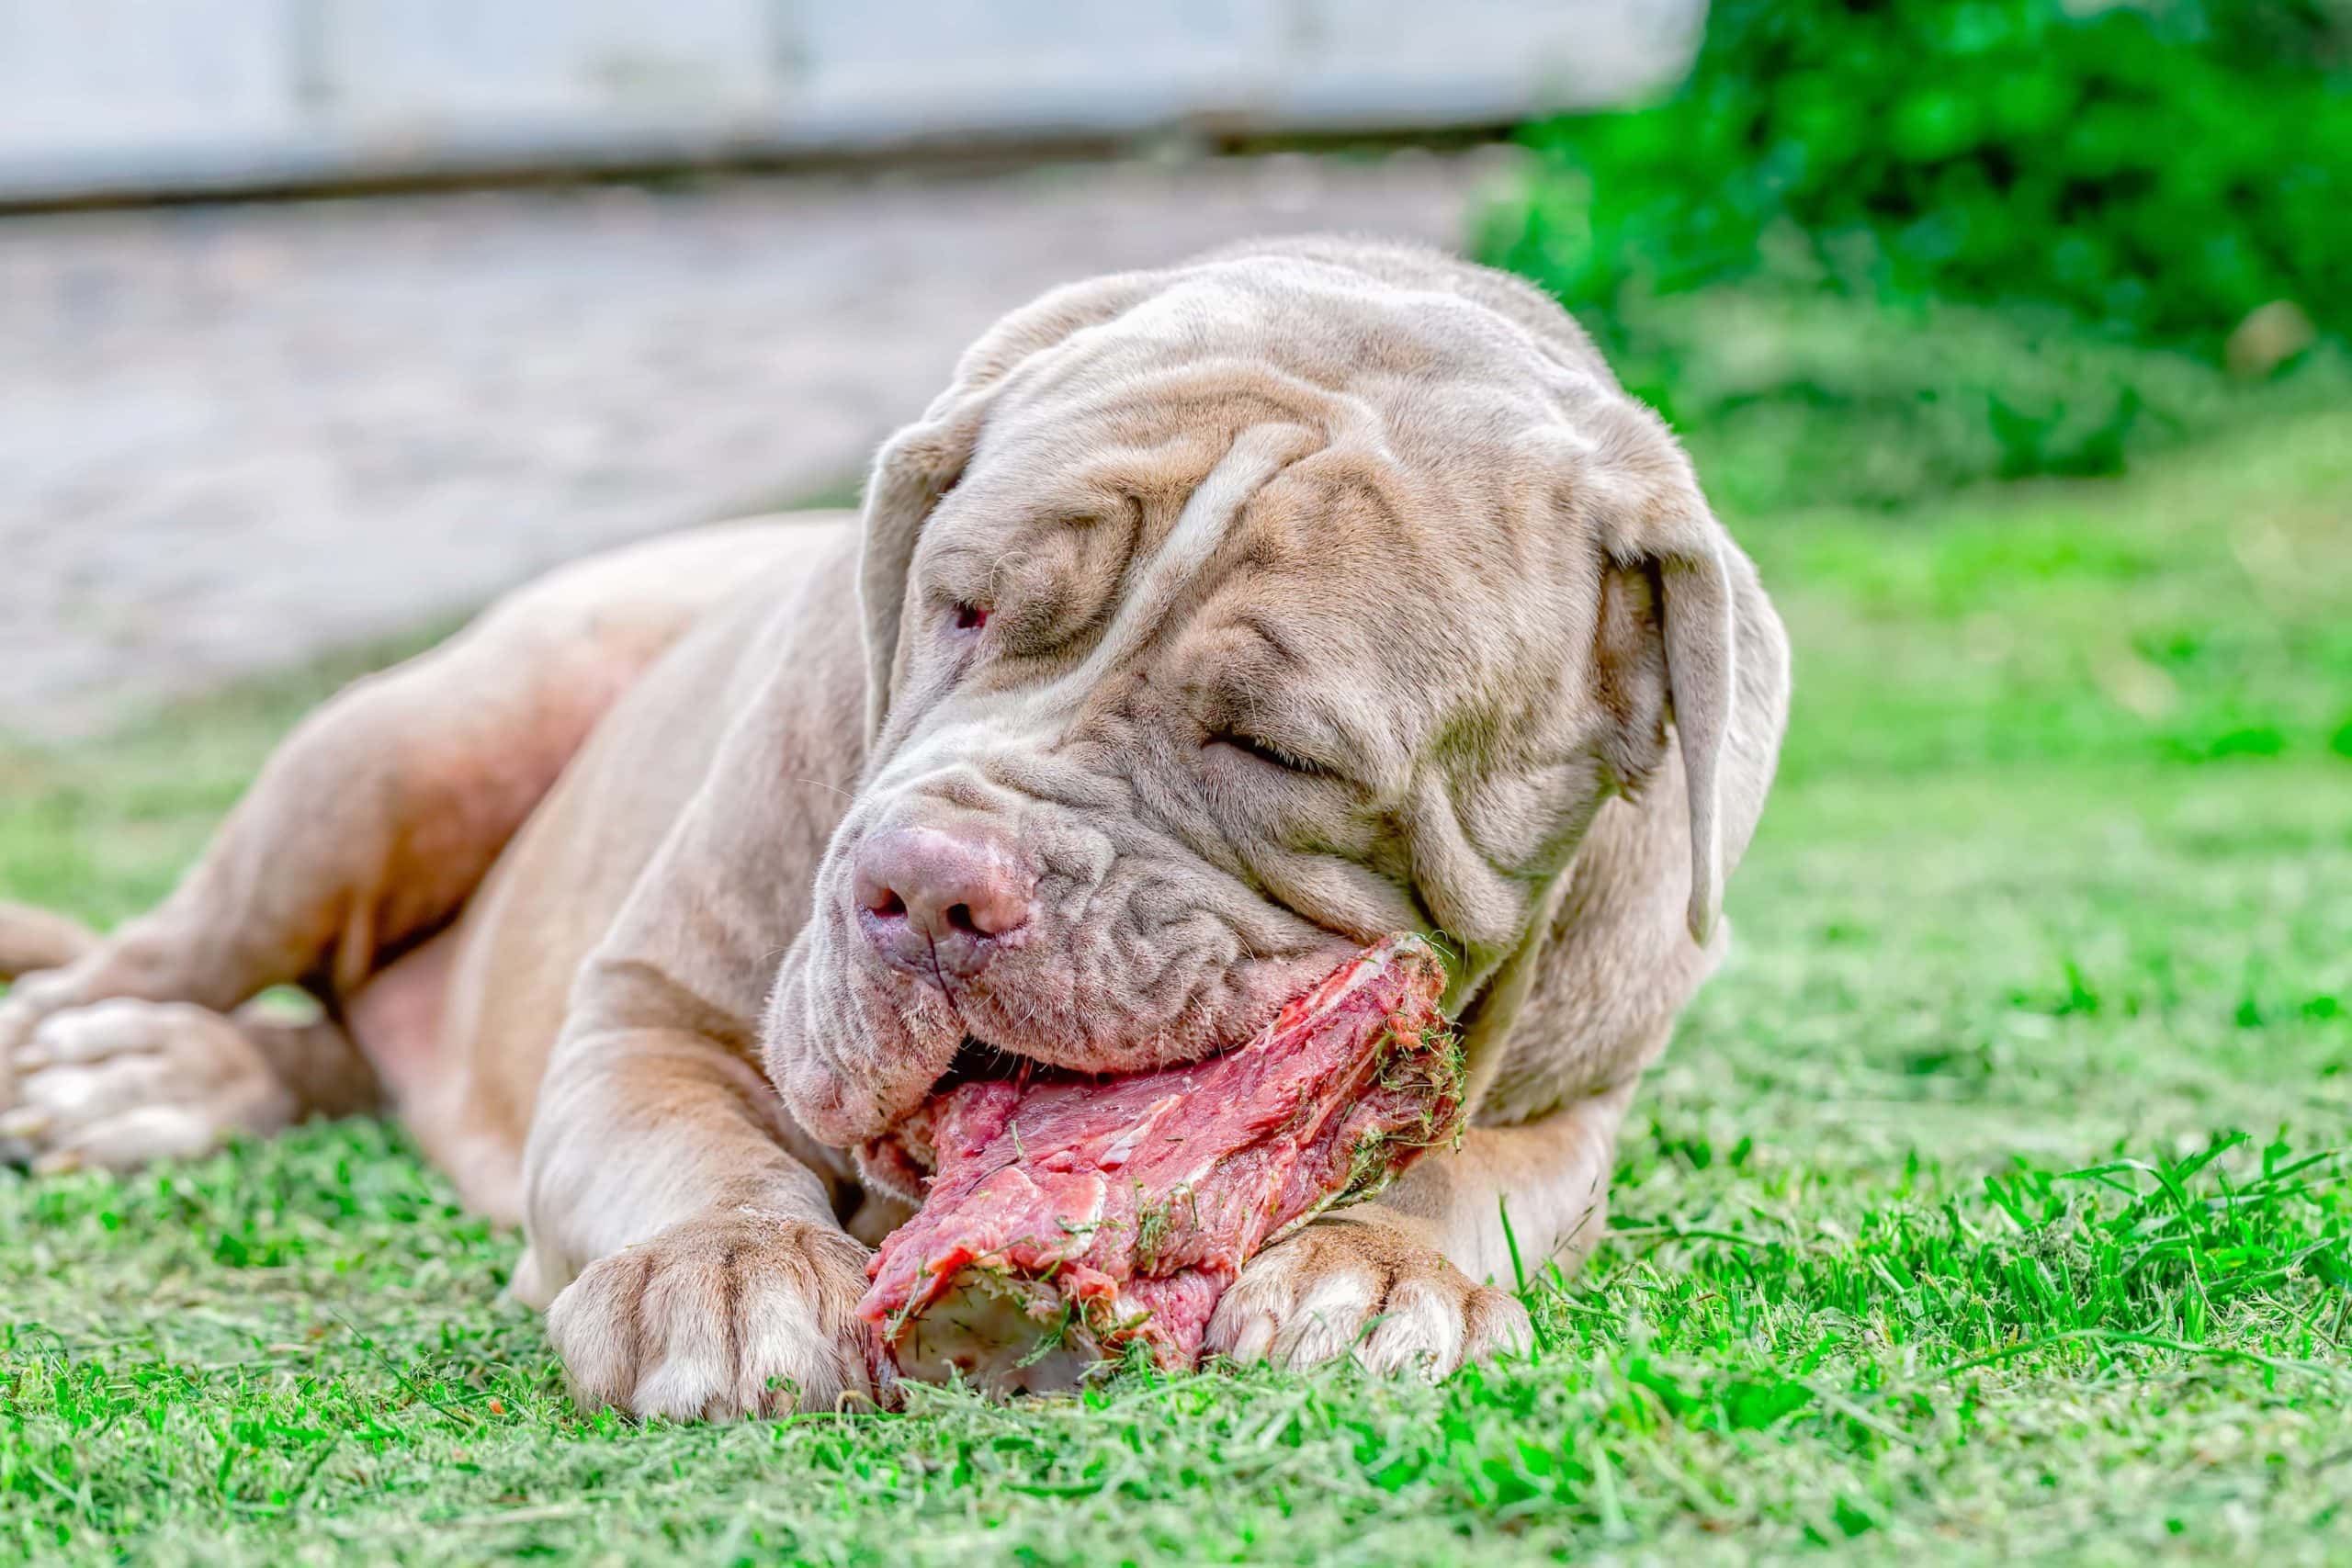 Can dogs eat pink steak?